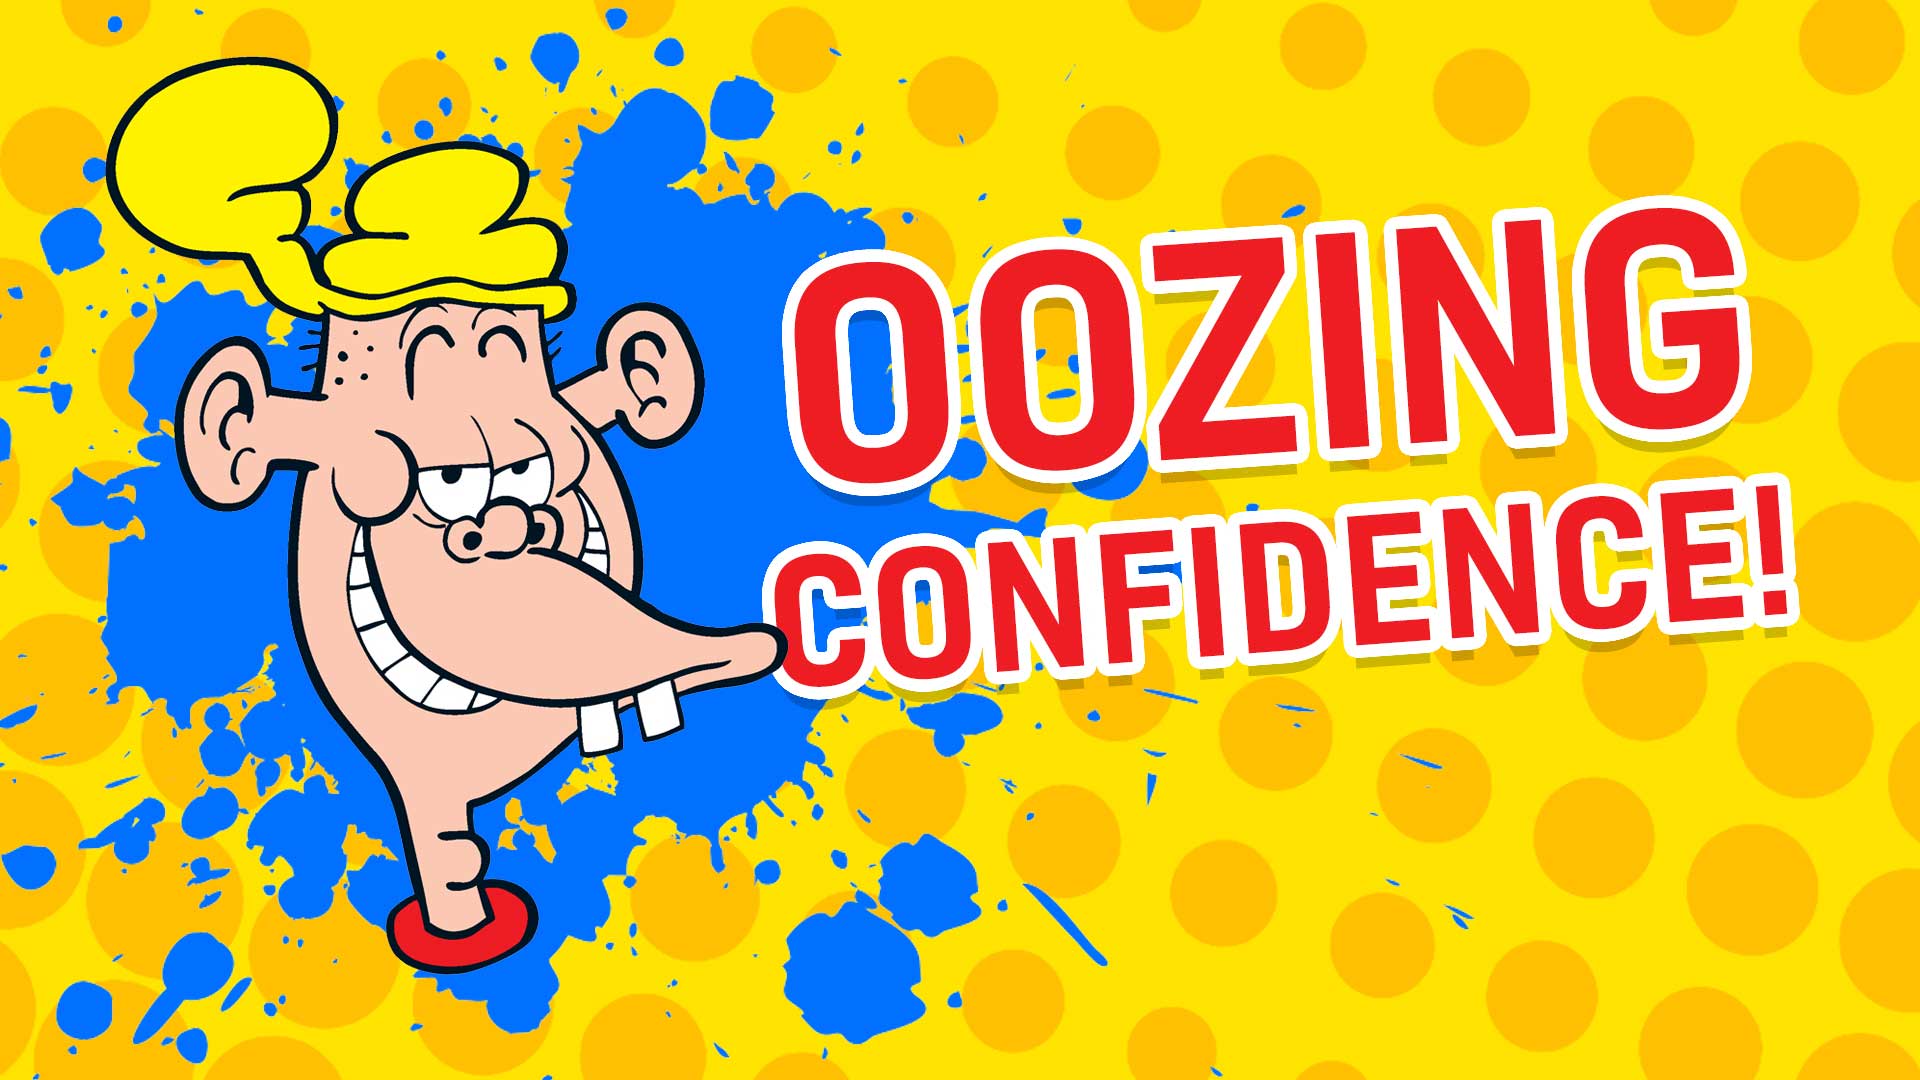 Result: Oozing confidence